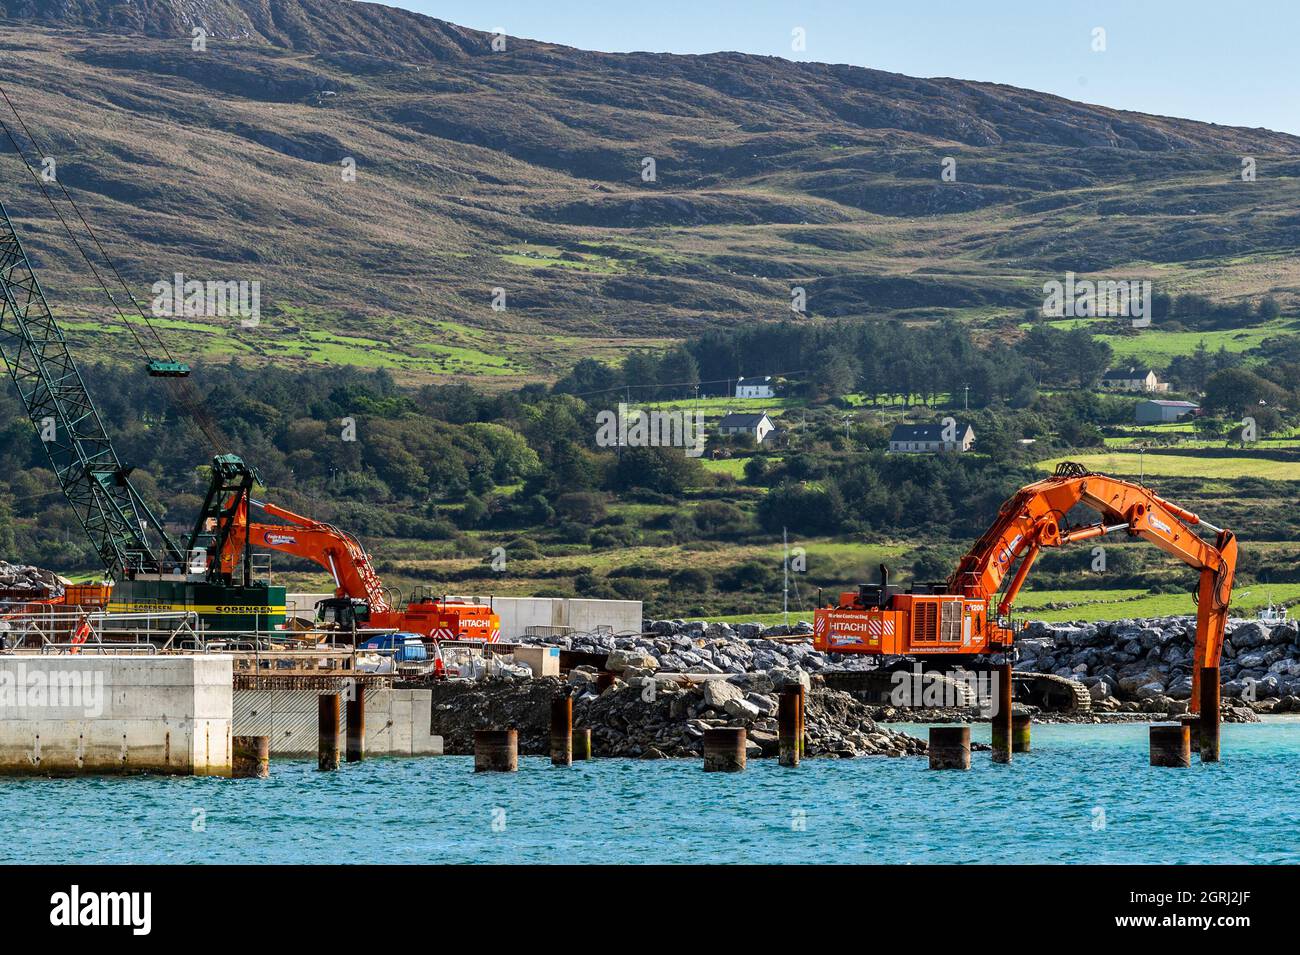 Castletownbere, West Cork, Ireland. 1st Oct, 2021. Work is continuing on the €33 million, 216m long quay development on Dinish Island in Castletownbere. The works are expected to be finished by March 2022. Credit: AG News/Alamy Live News Stock Photo